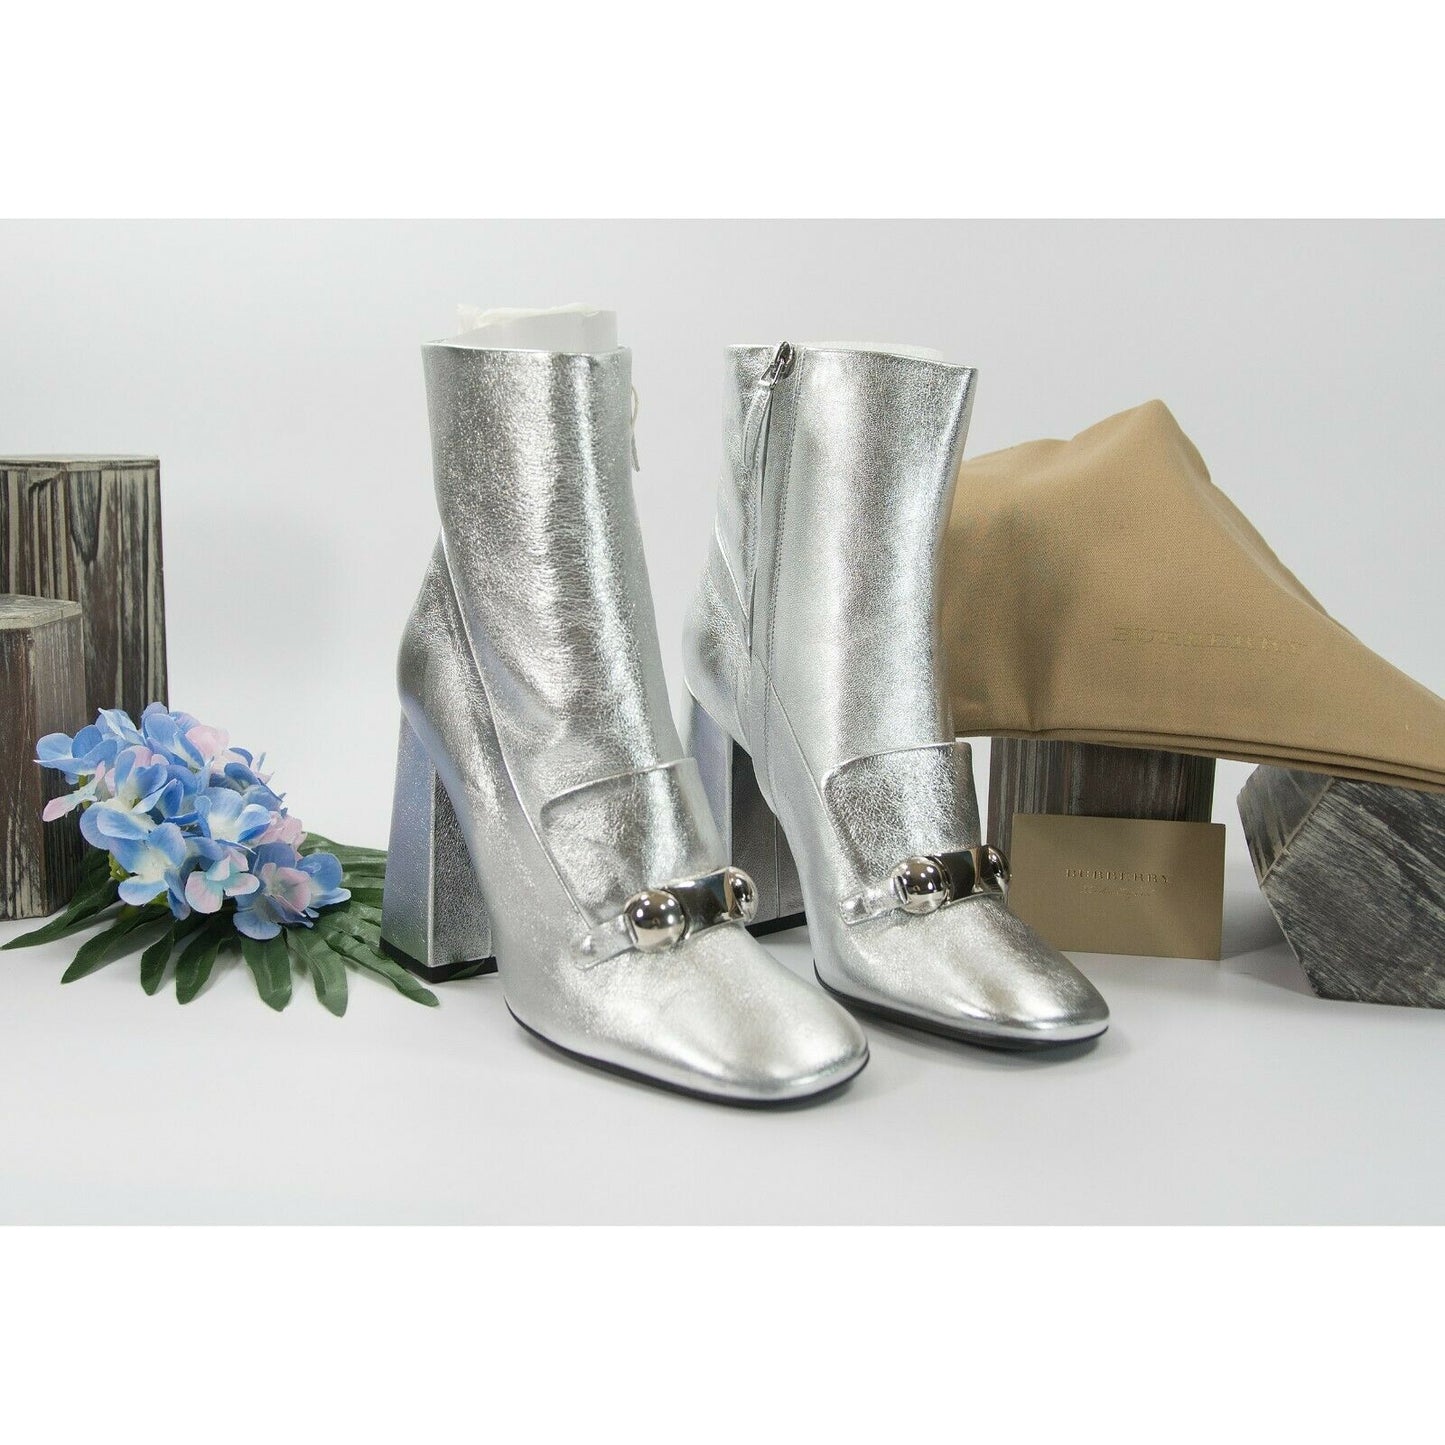 Burberry Metallic Silver Leather Brabant Zip Ankle Booties Boots Size 39.5